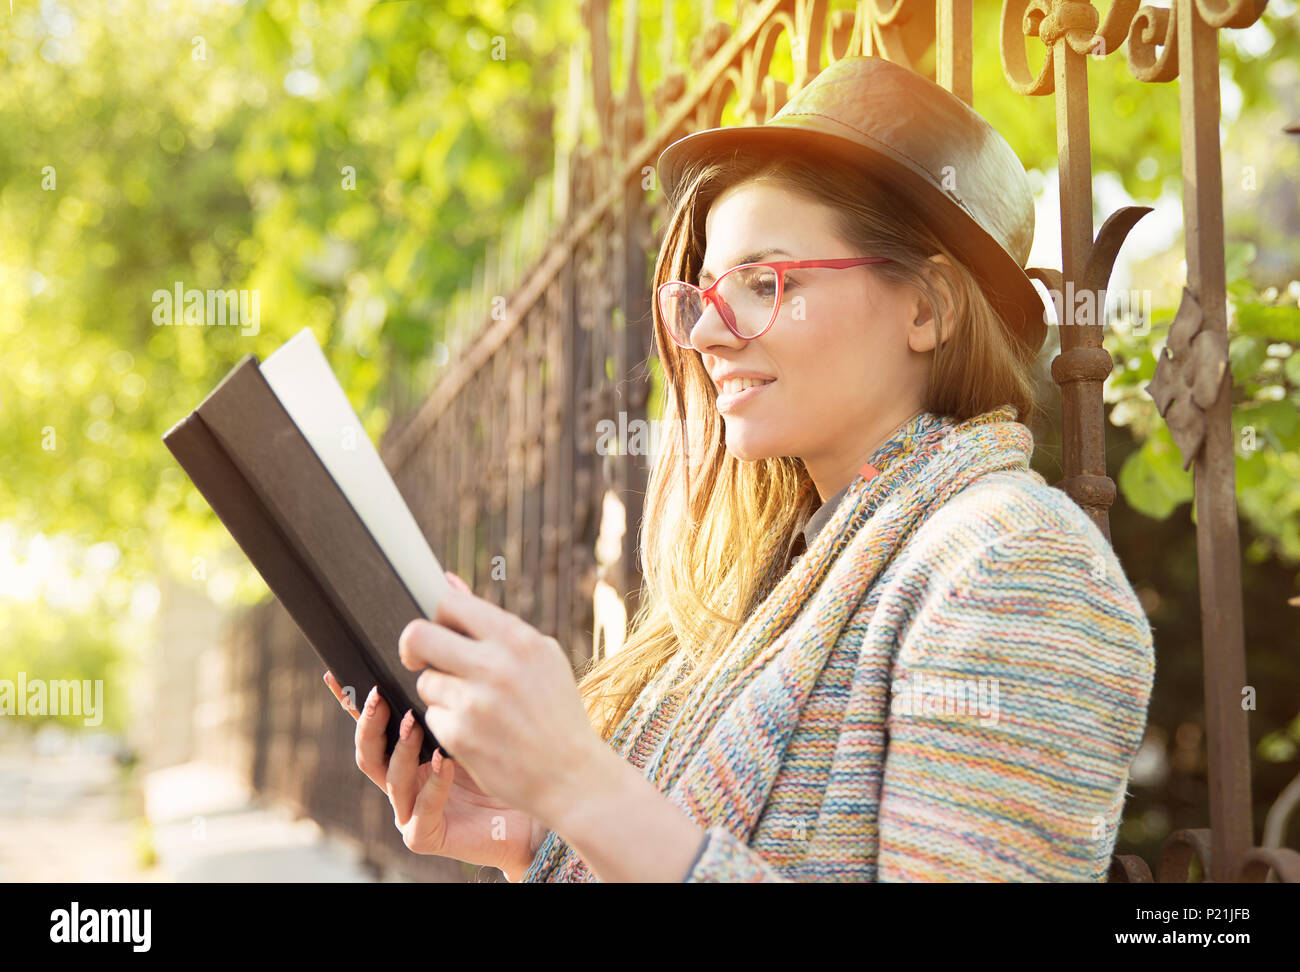 Young woman reading a book outdoors Stock Photo